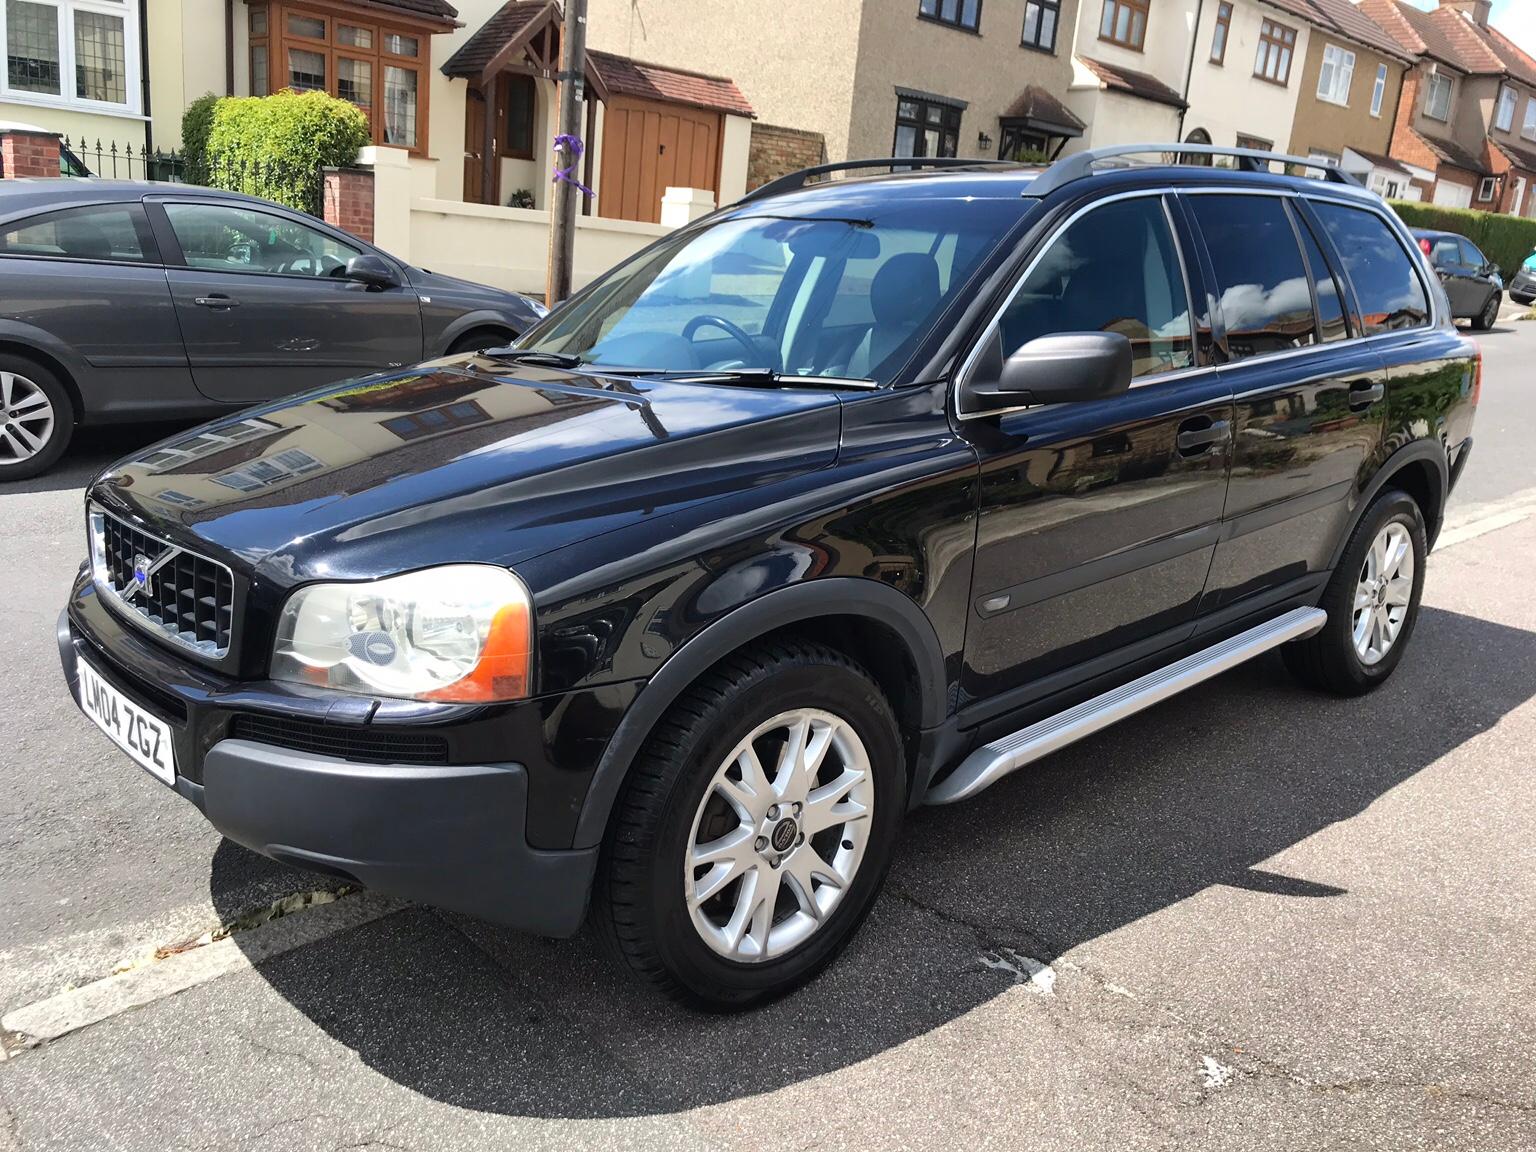 VOLVO XC90 T6 SE AWD AUTO 2.9 PETROL in RM3 London for £